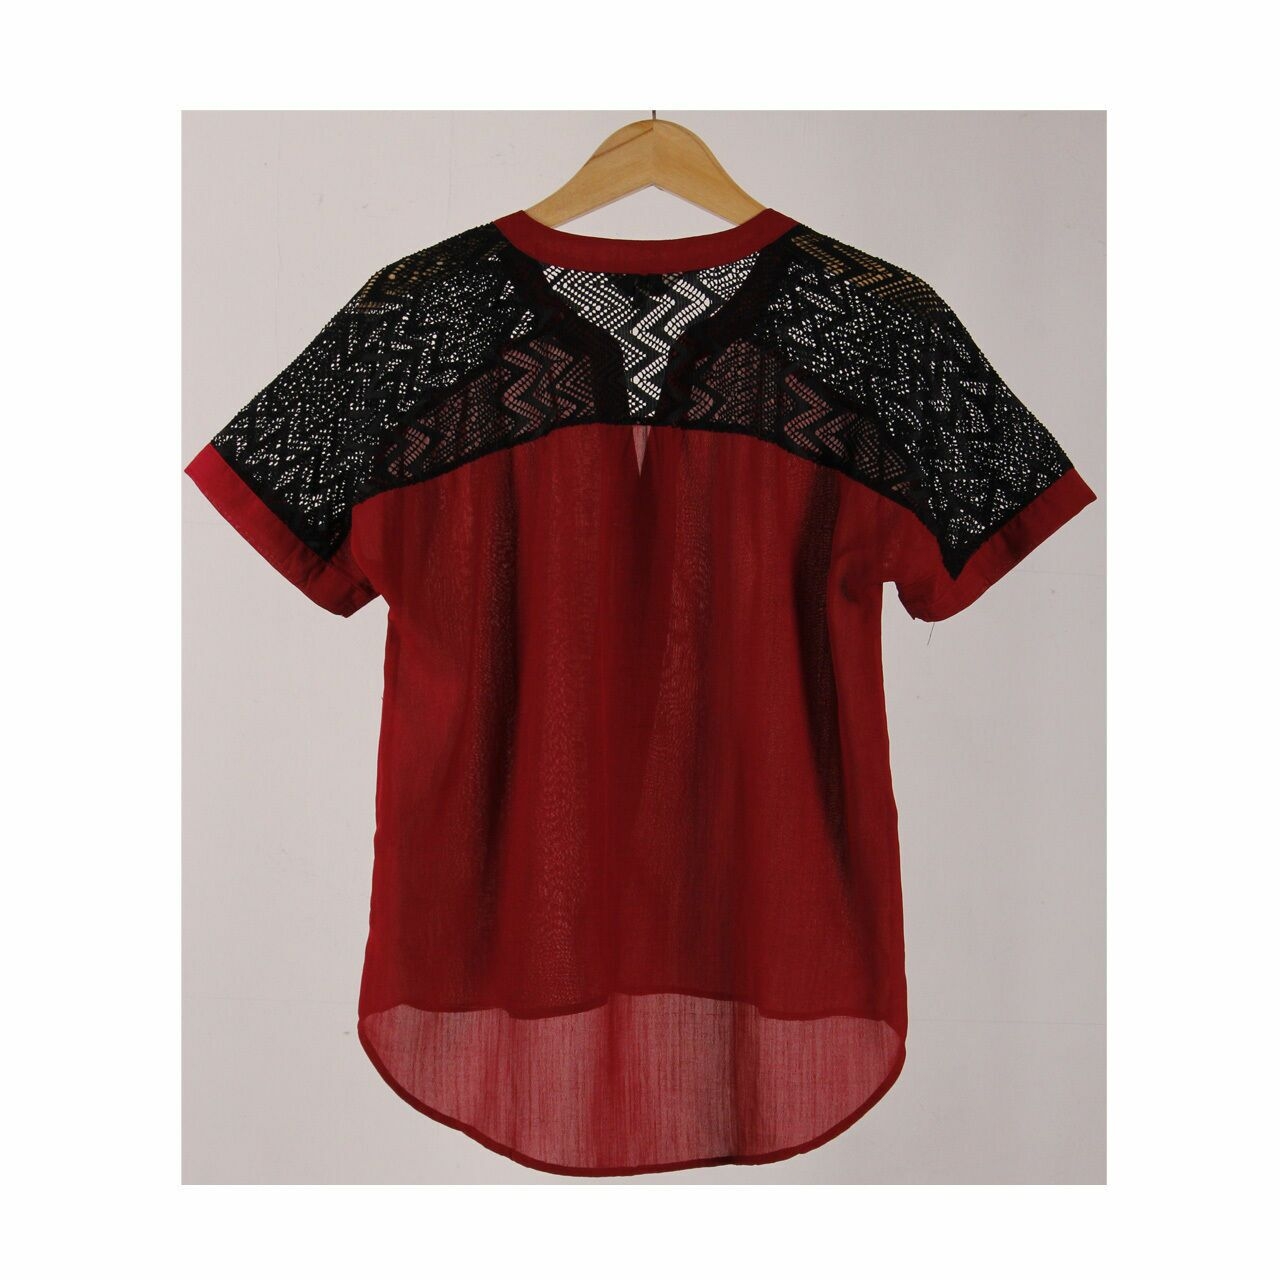 Island Story Black & Red Blouse